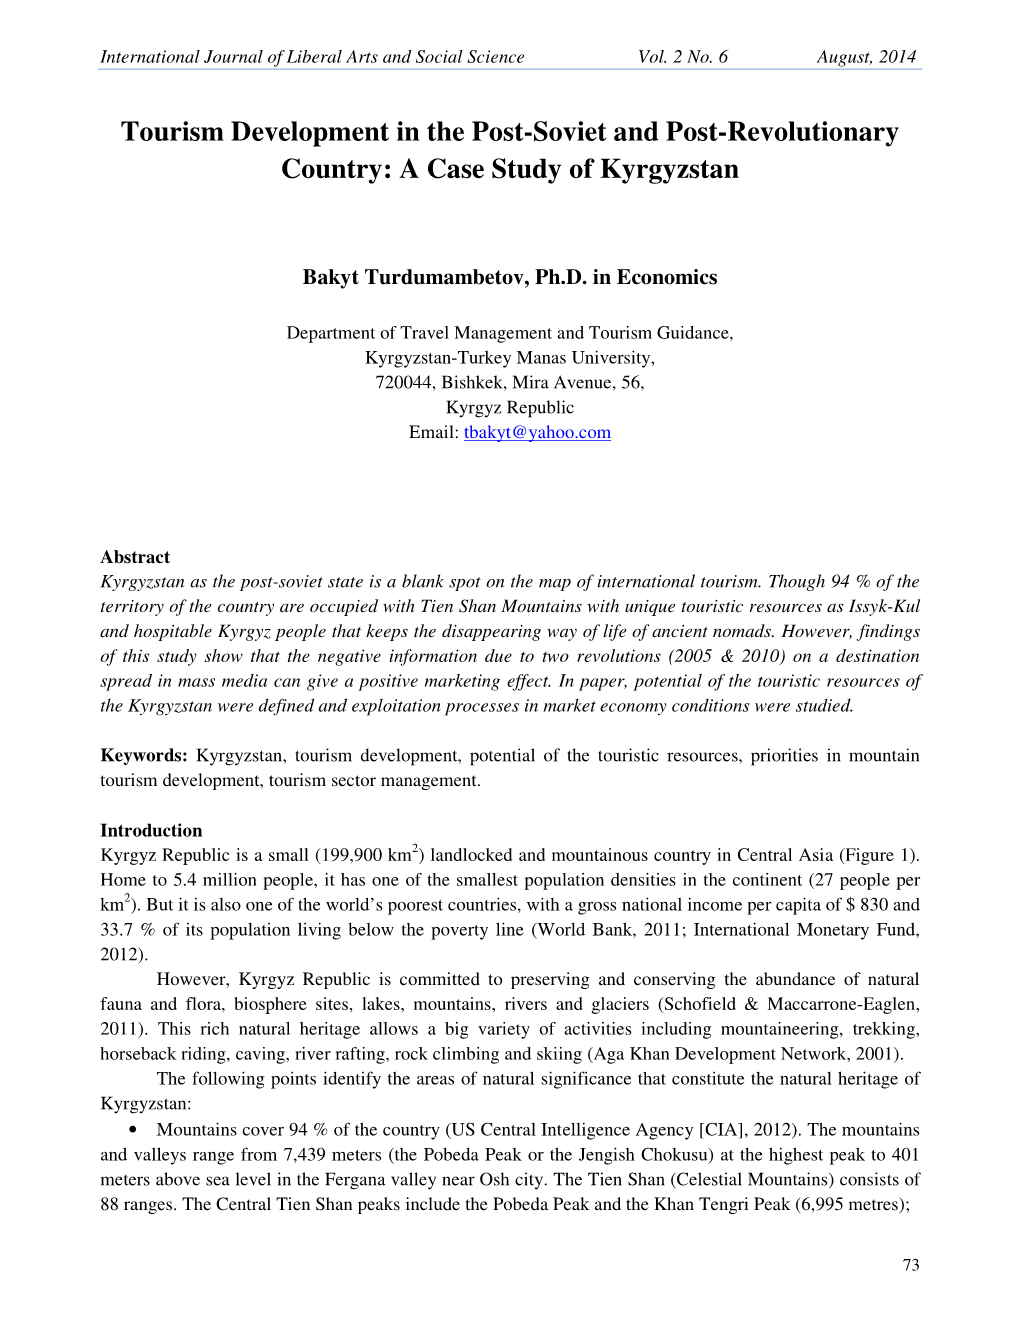 Tourism Development in the Post-Soviet and Post-Revolutionary Country: a Case Study of Kyrgyzstan